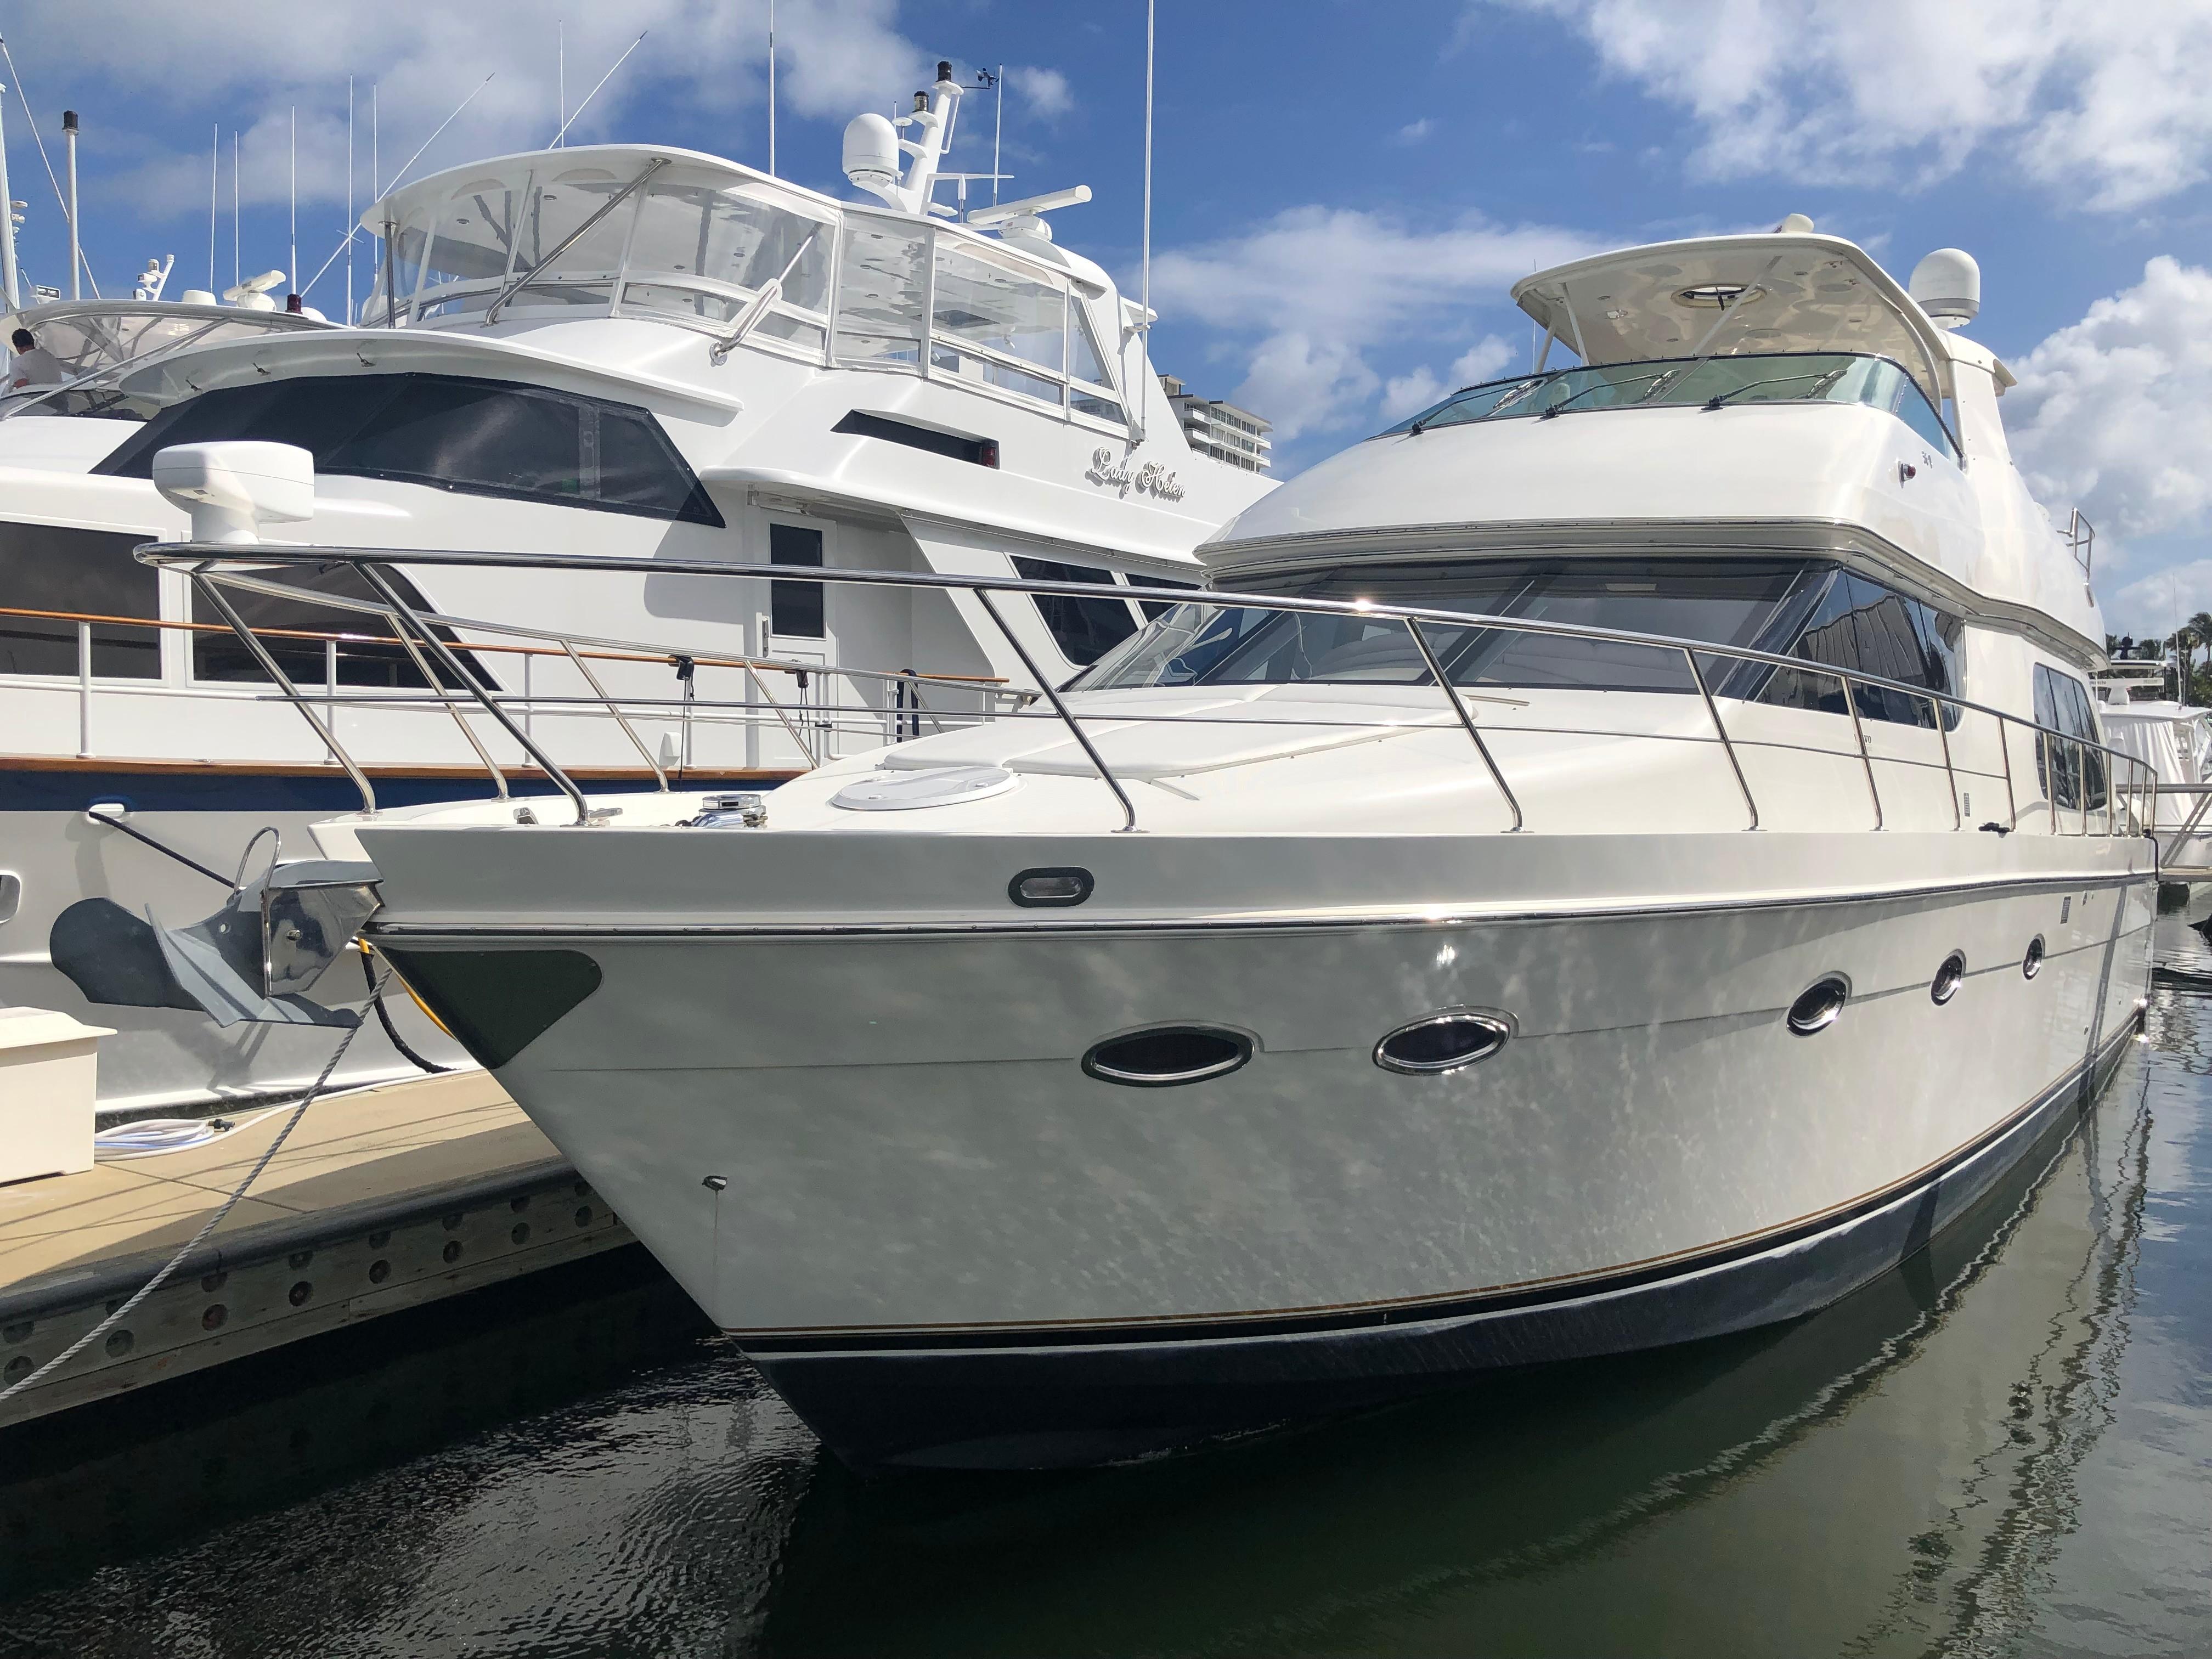 56 ft cruiser yacht for sale